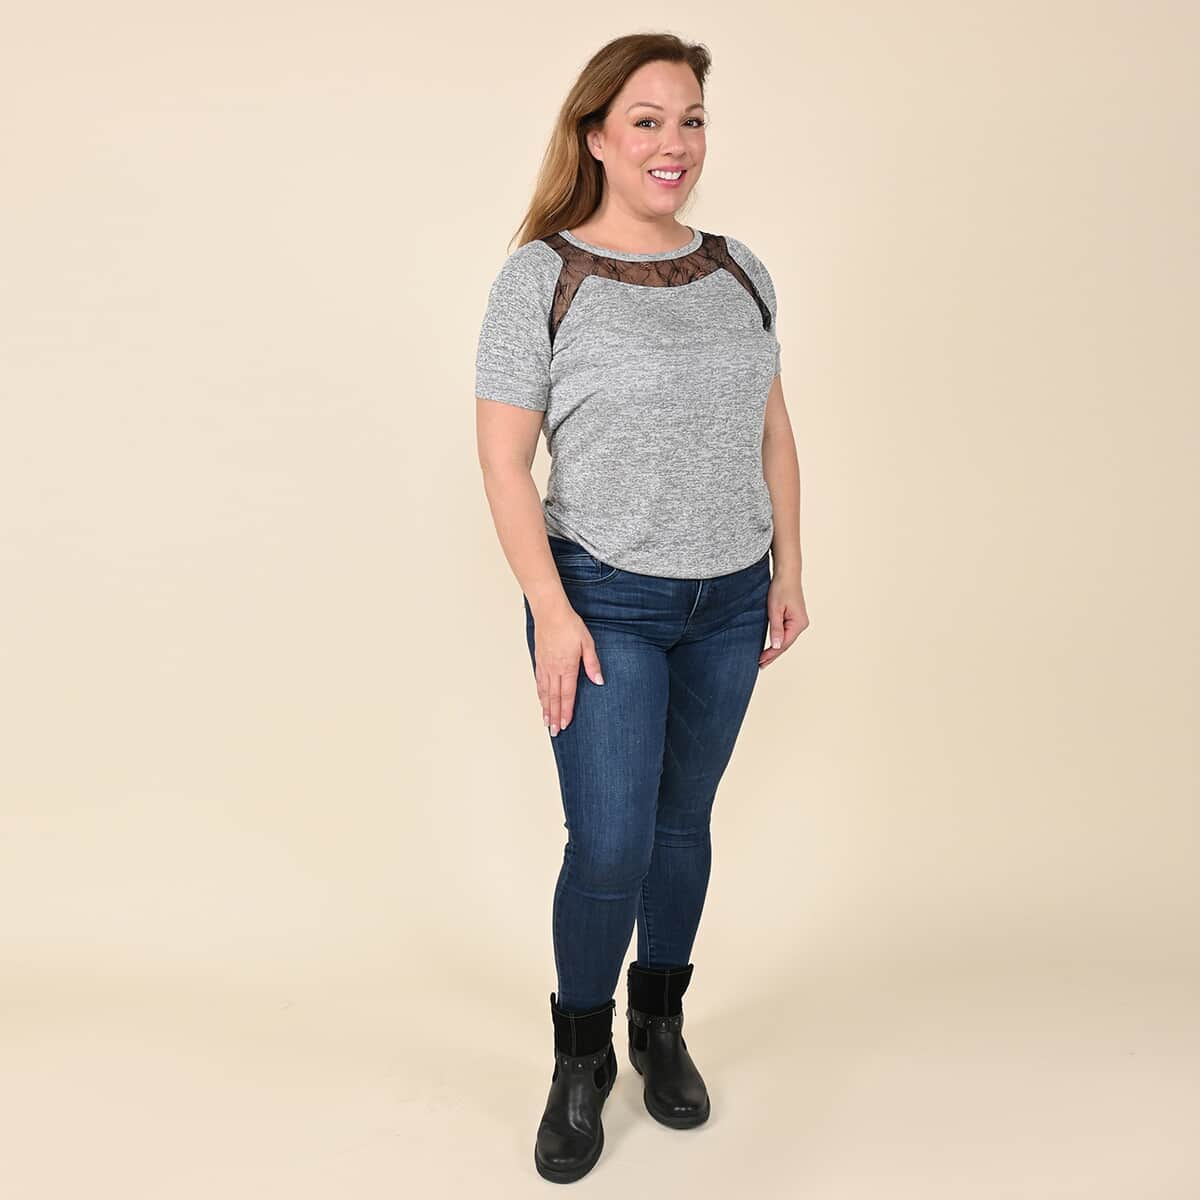 Tamsy Gray Knit Shirt with Black Lace Inlay - XL image number 0